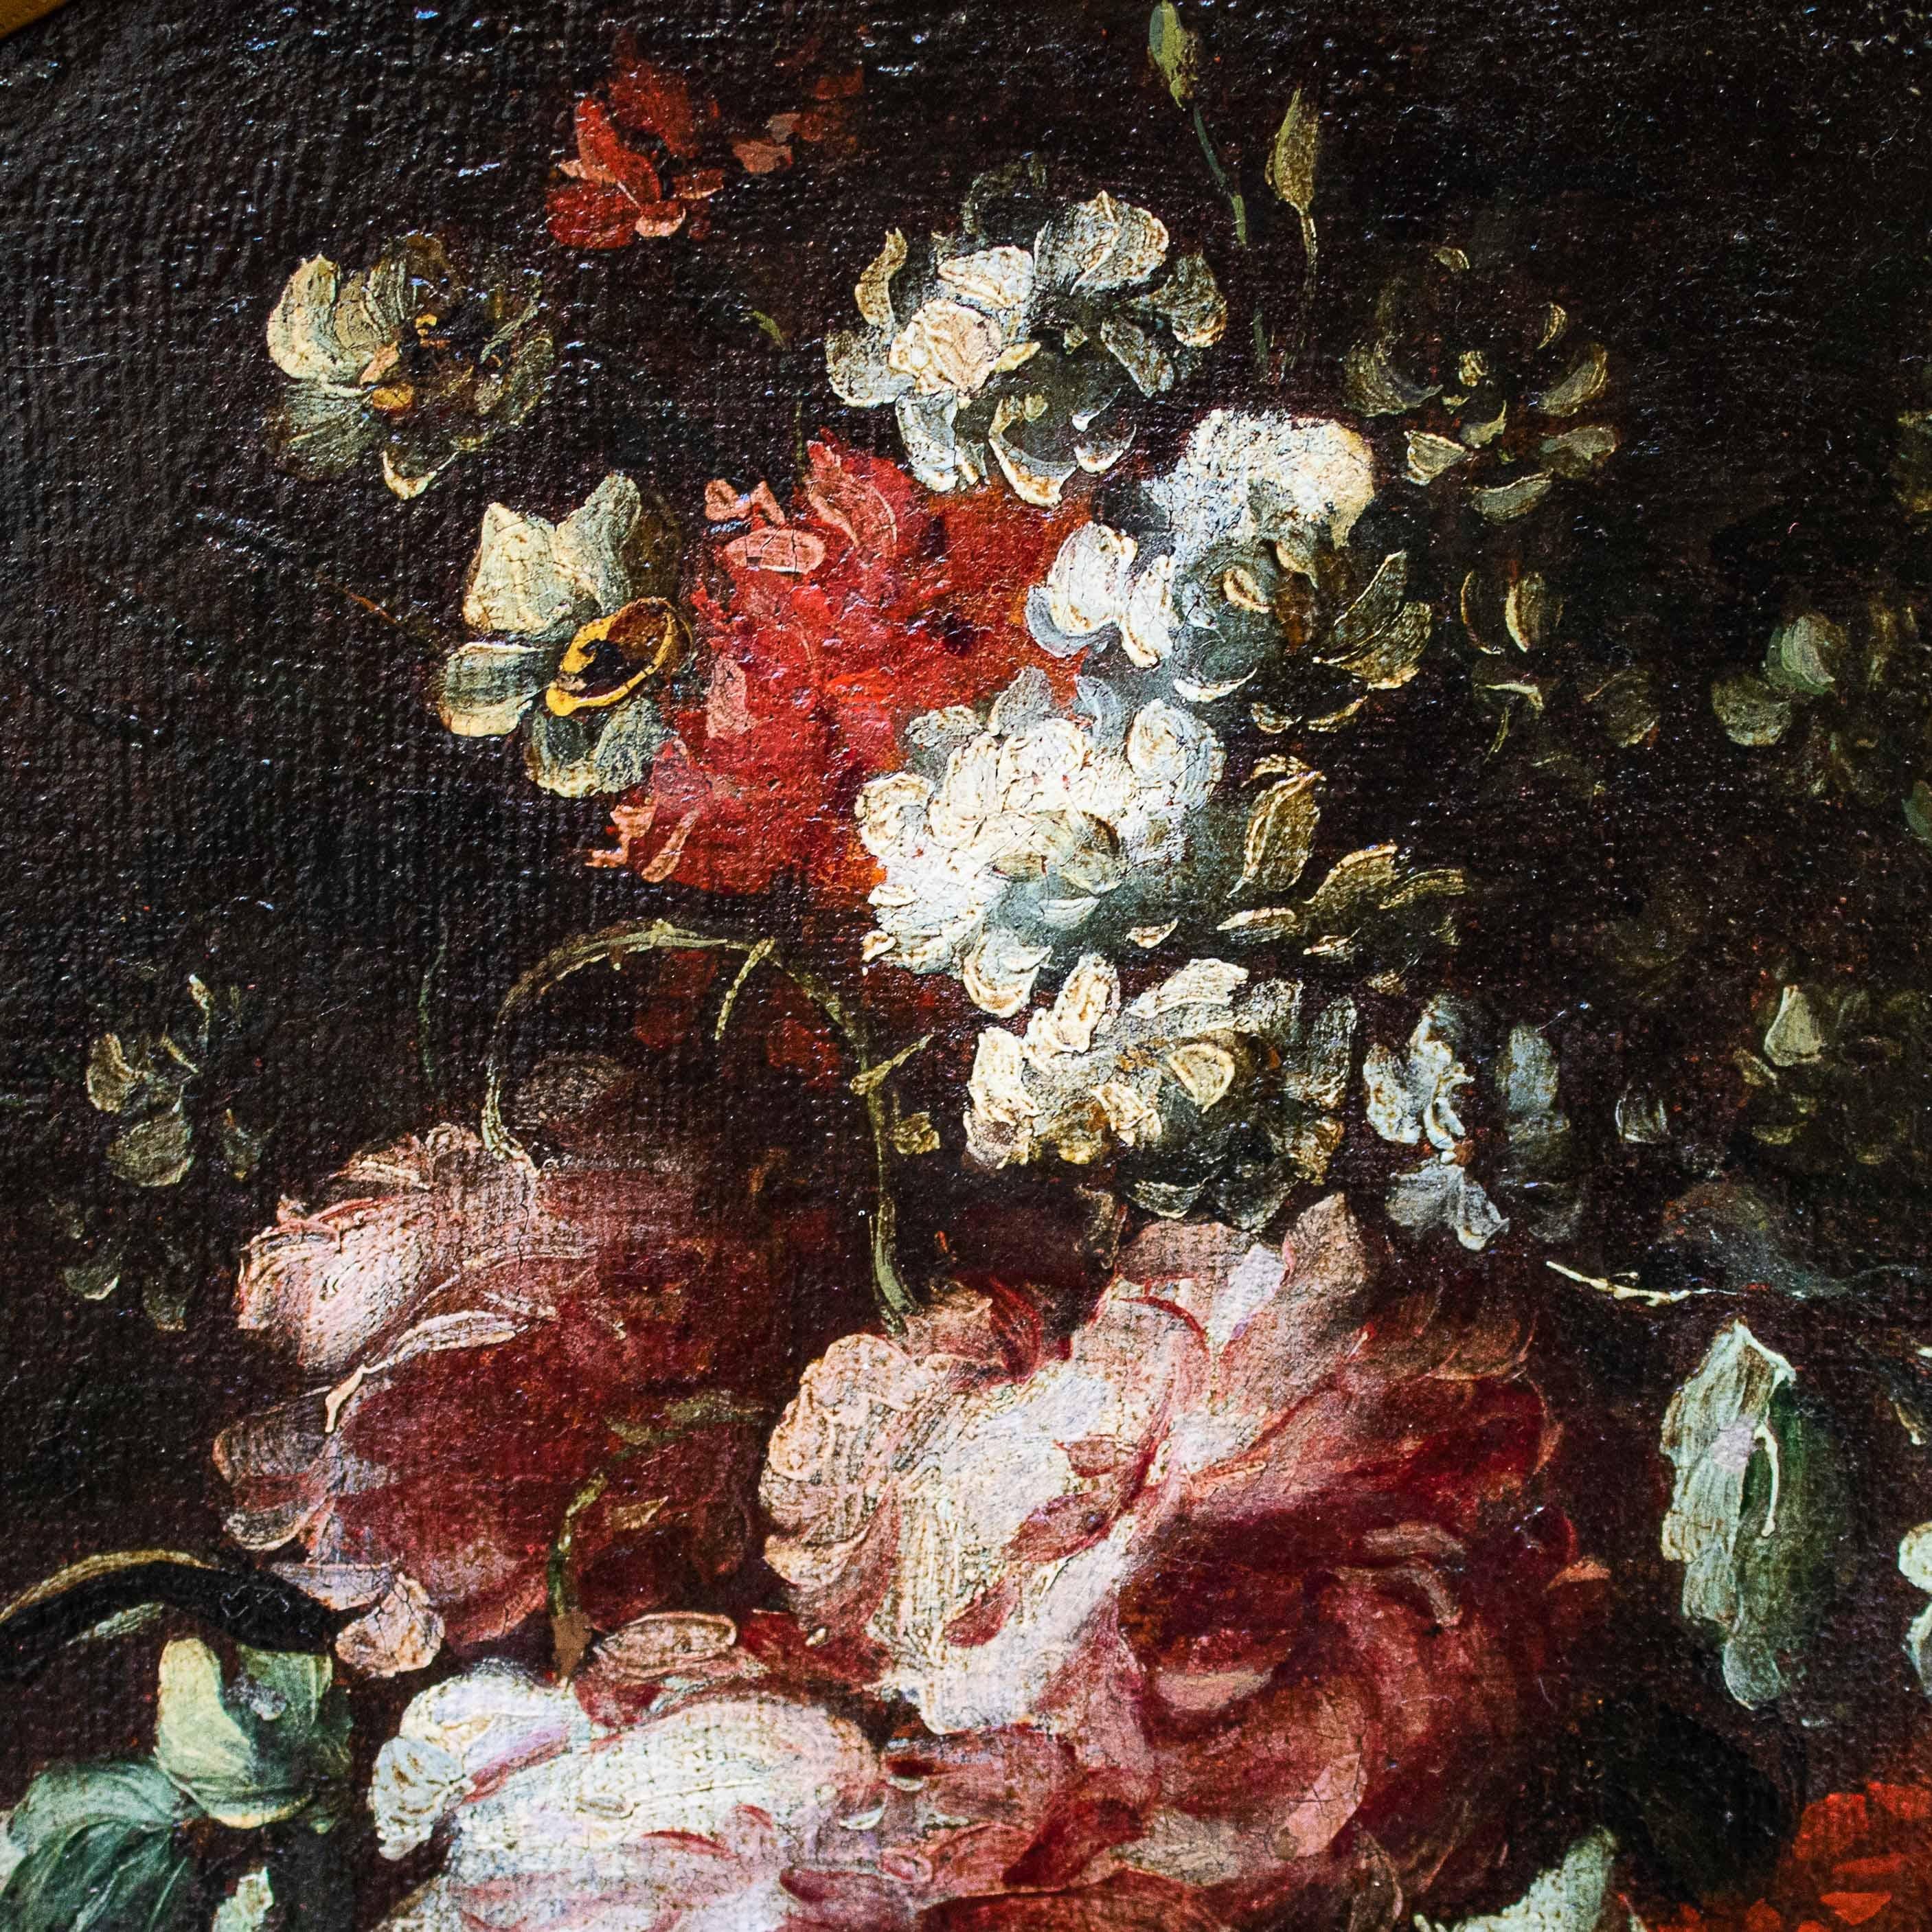 17th Century Still Lifes with Flowers Paintings Oil on Canvas 11